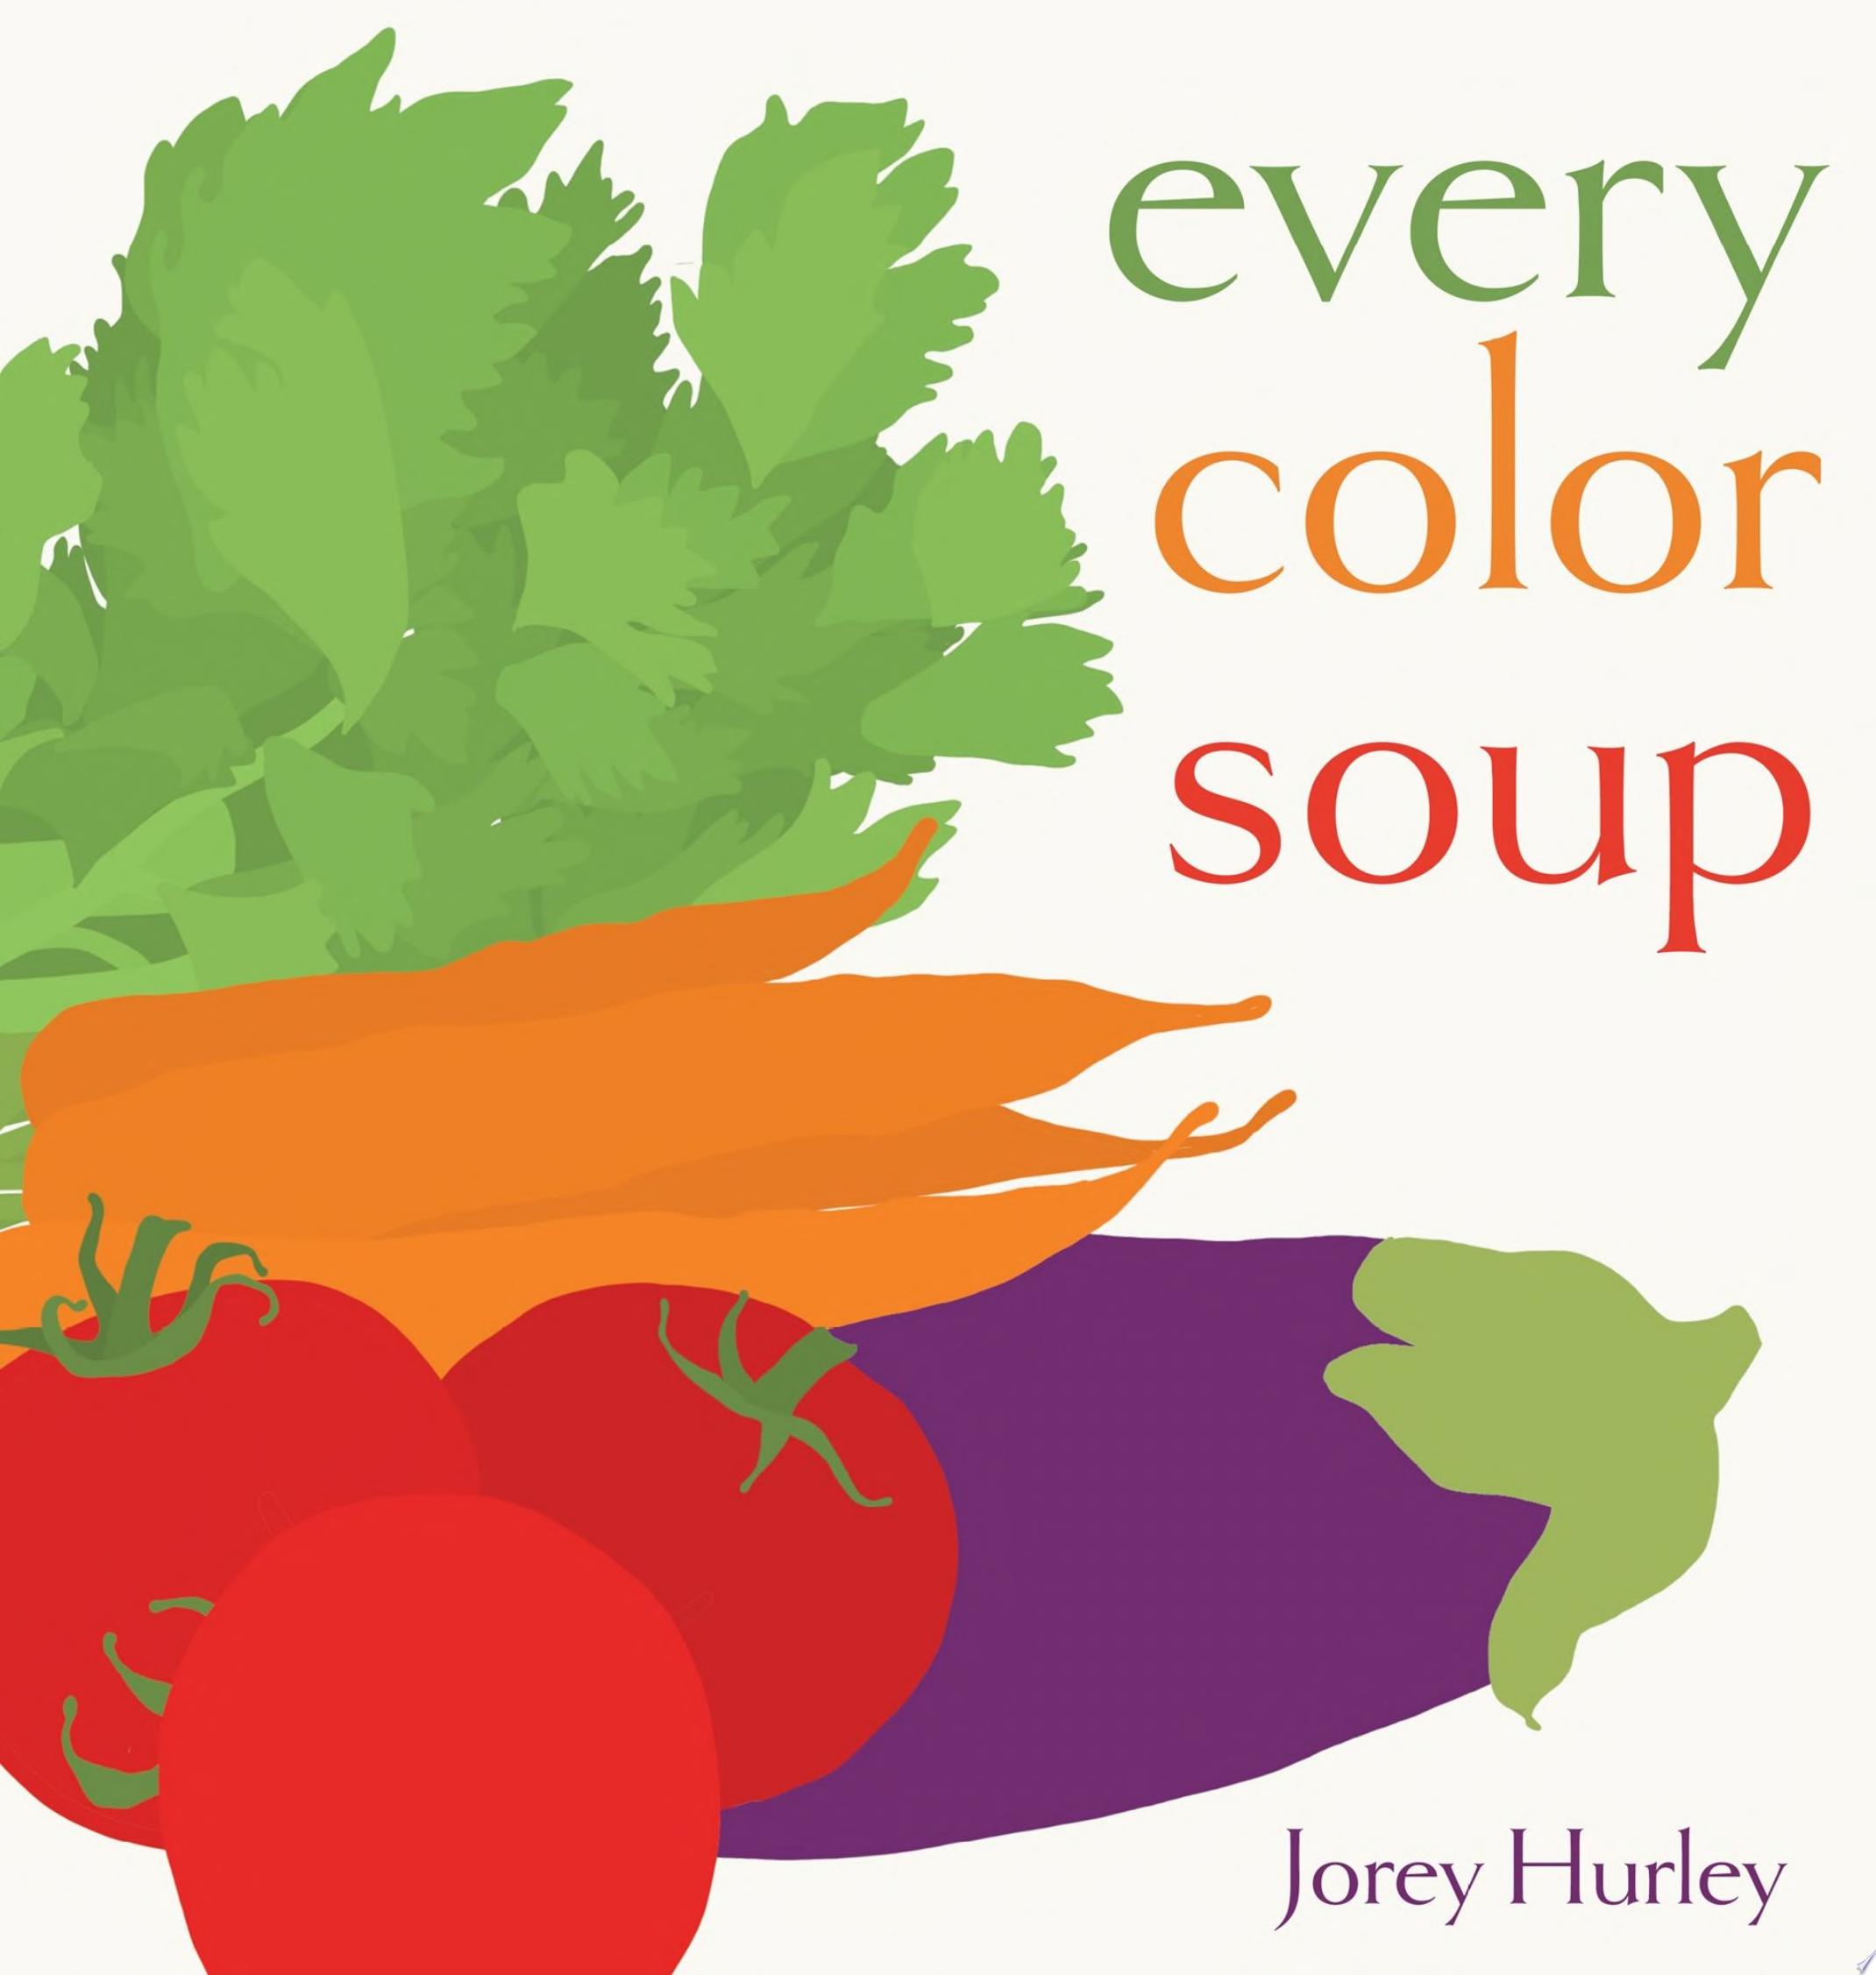 Image for "Every Color Soup"